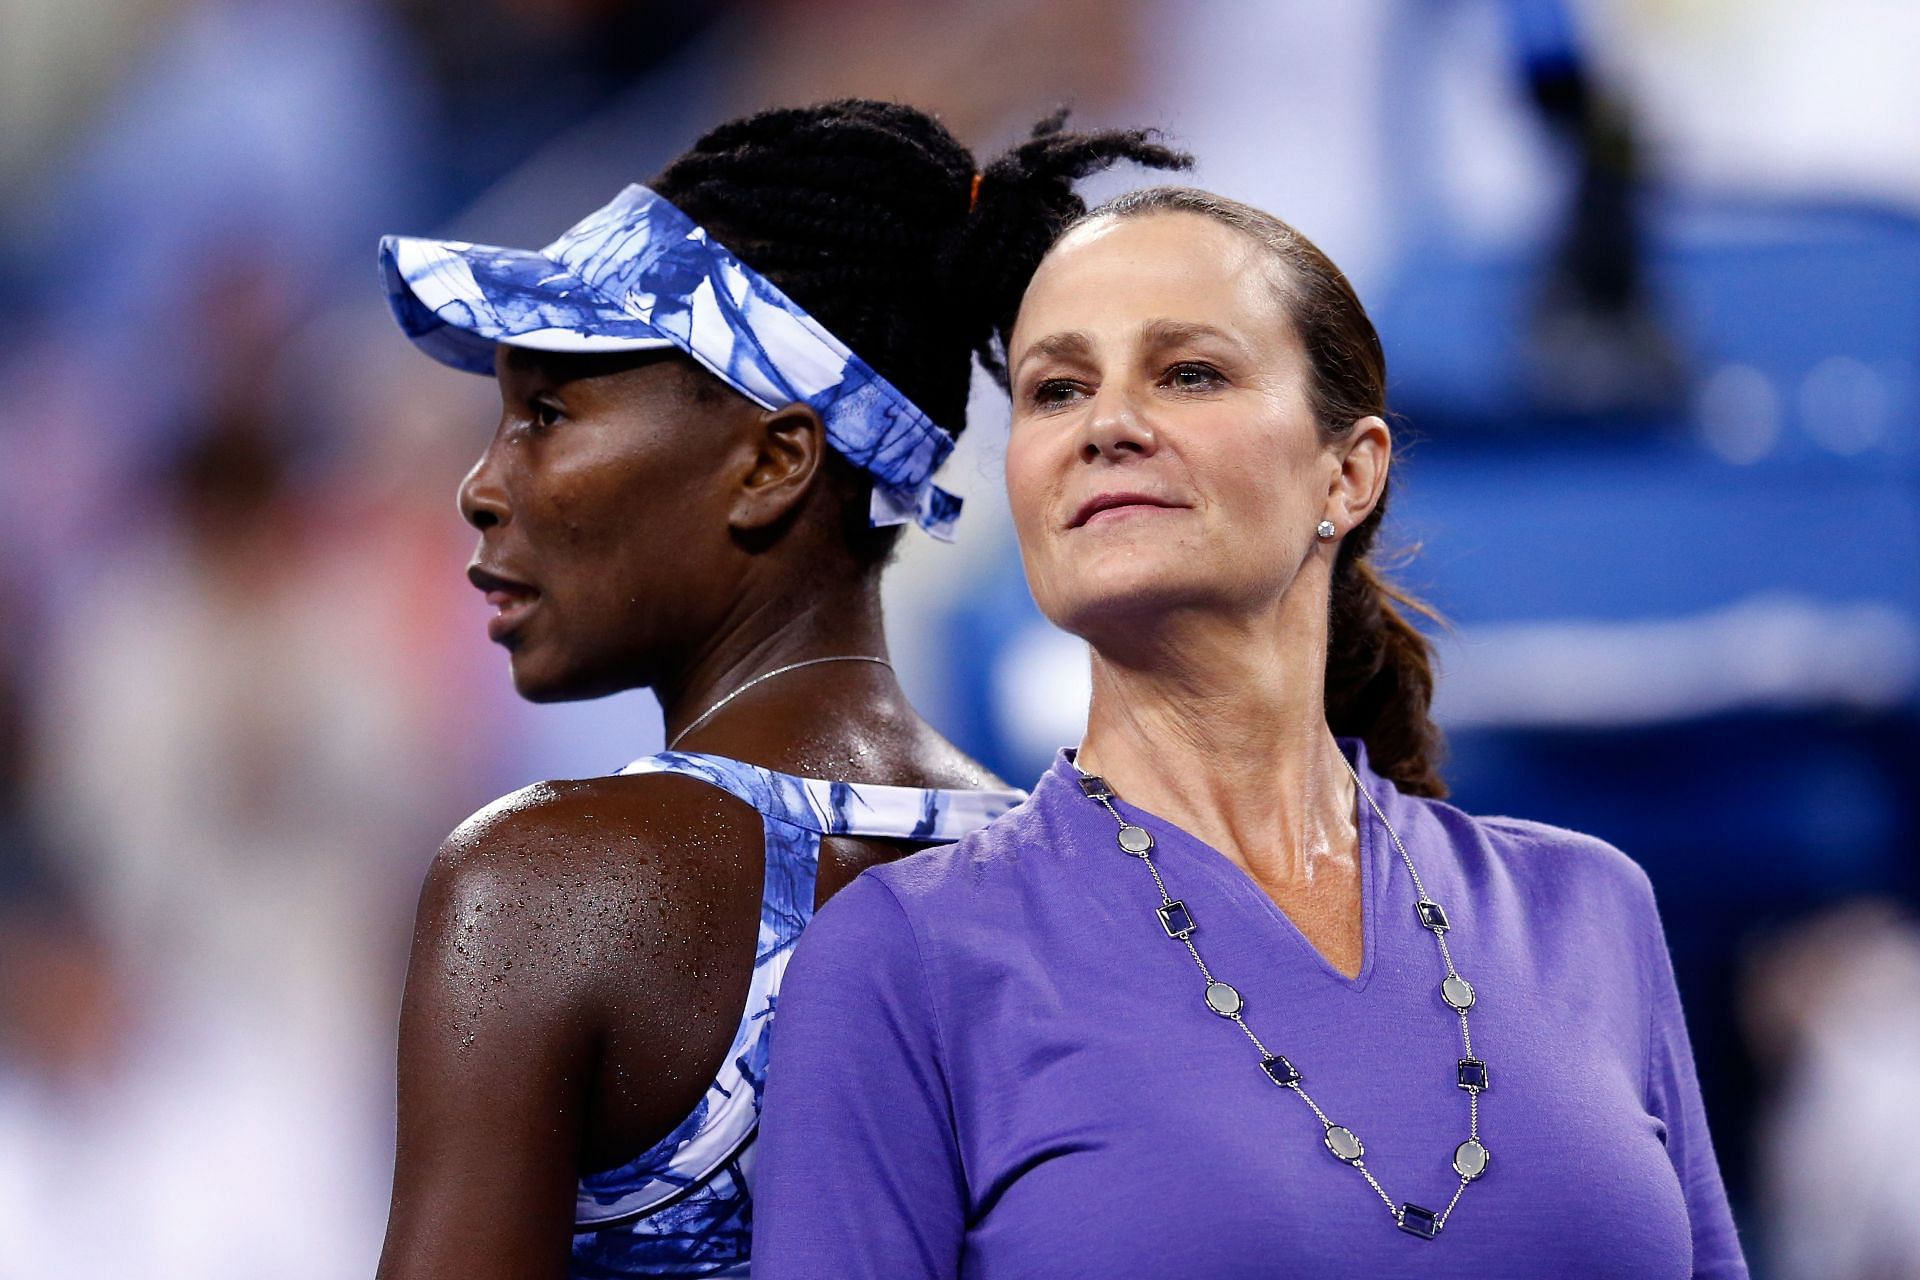 Pam Shriver with Venus Williams at the 2014 US Open